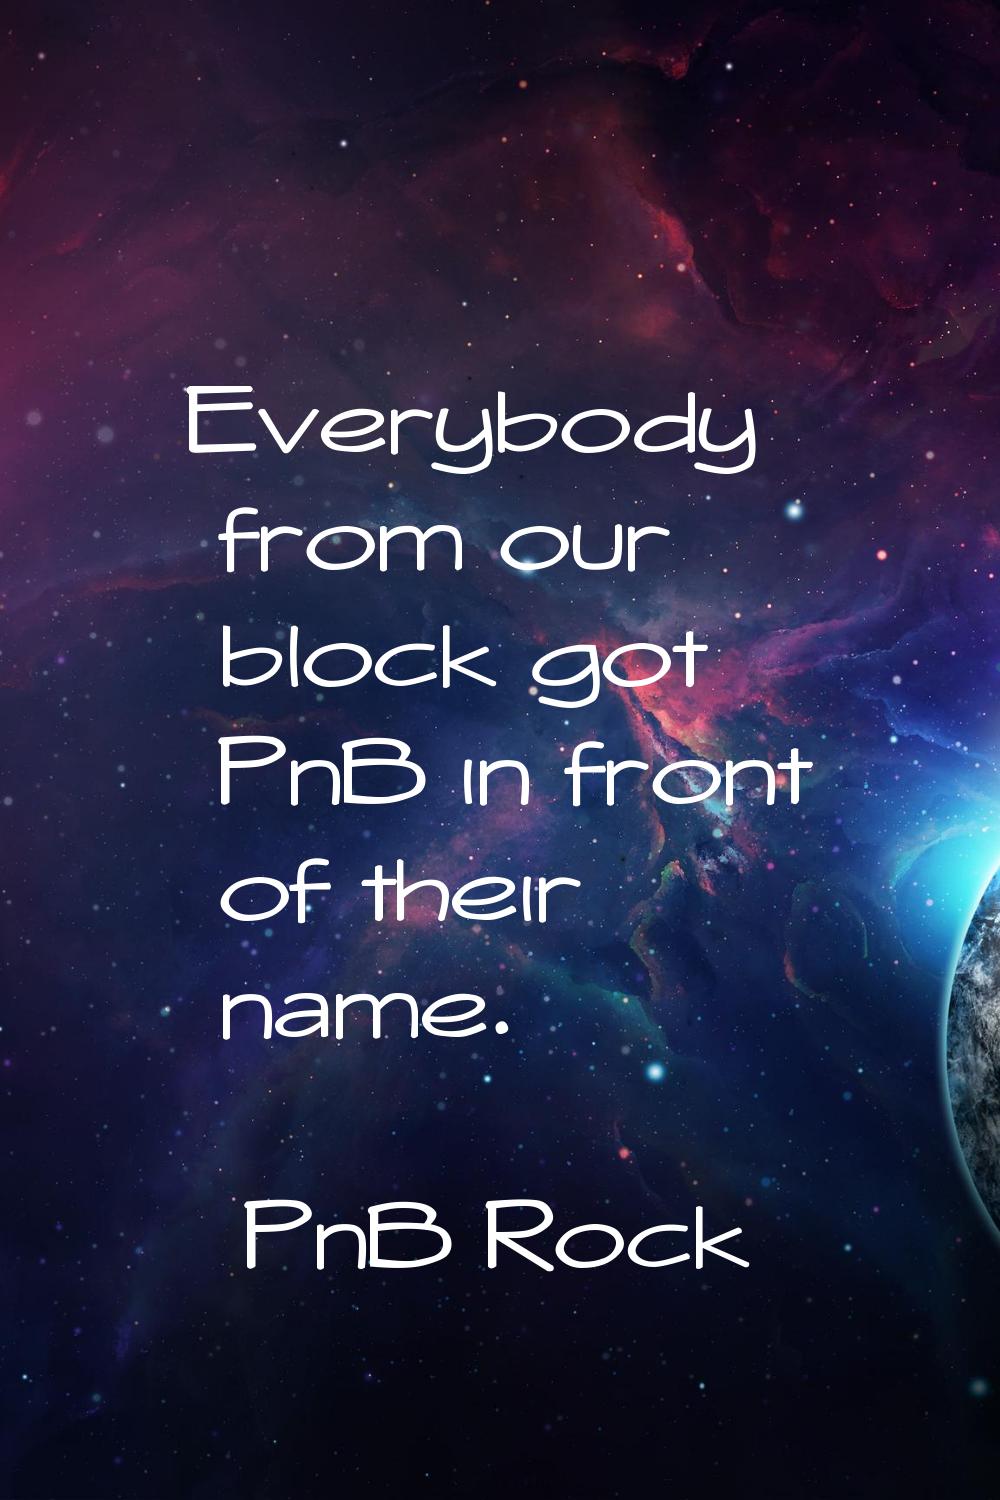 Everybody from our block got PnB in front of their name.